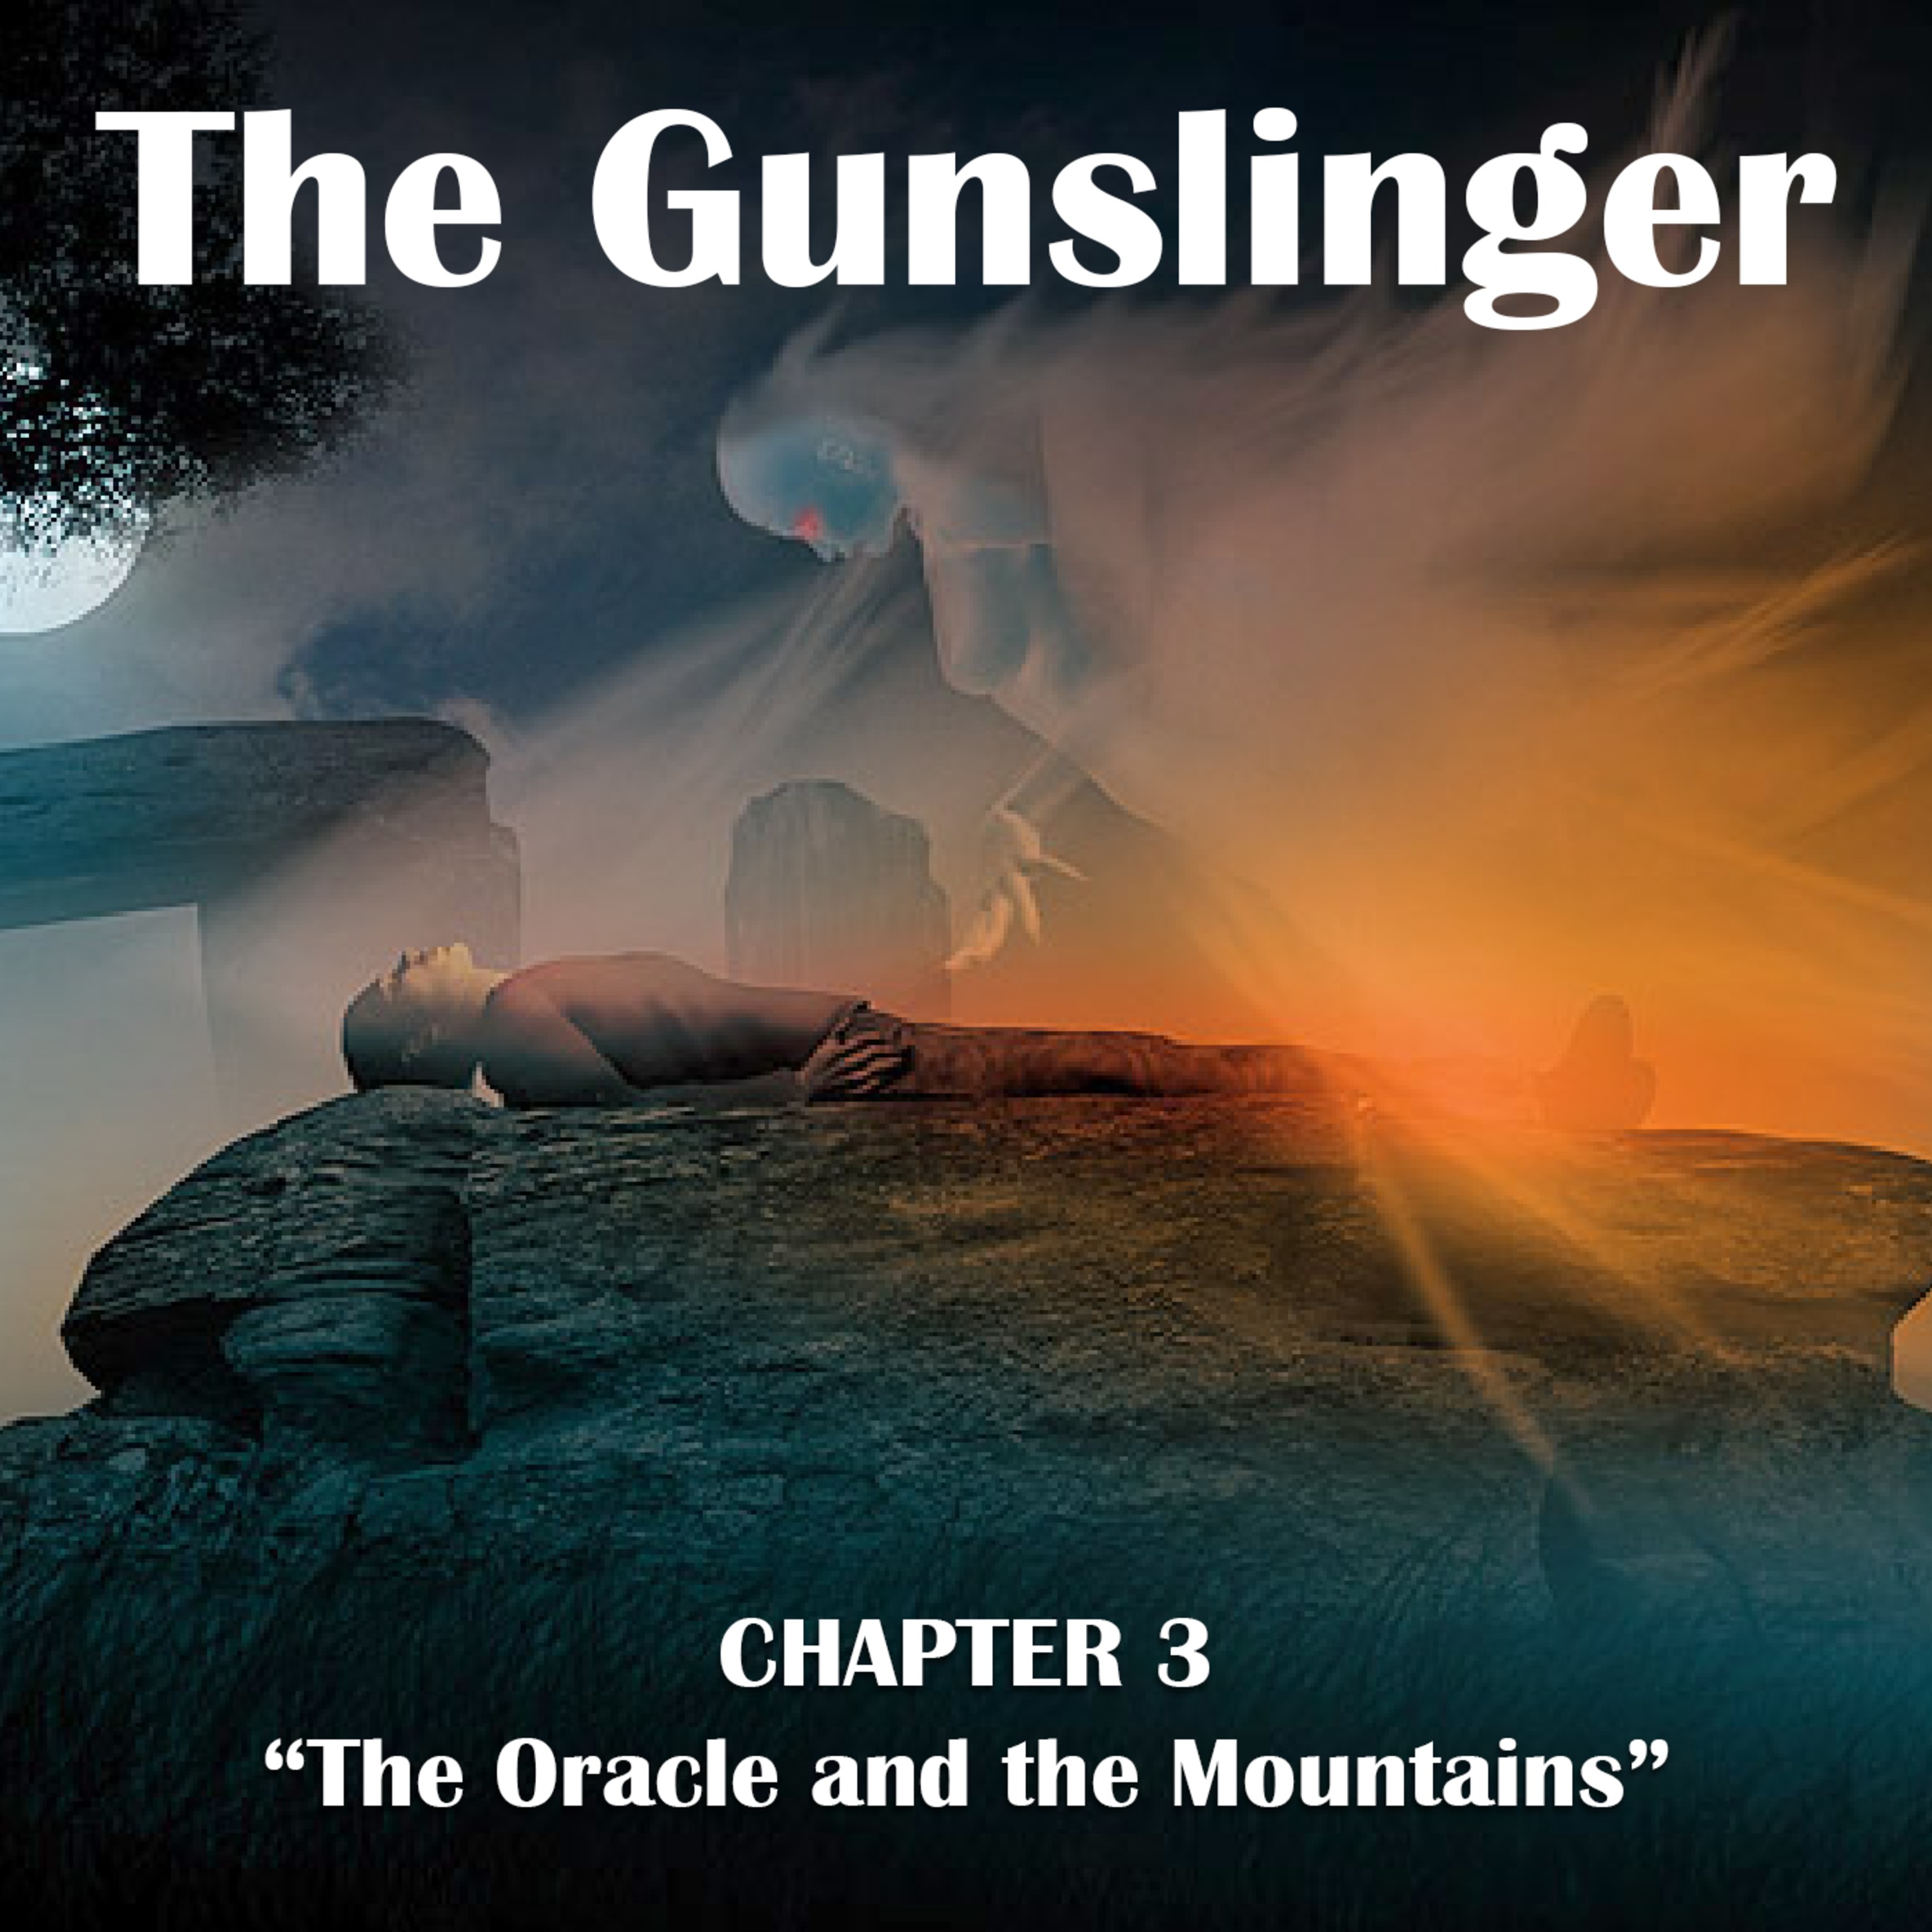 Episode 3: The Gunslinger, Chapter 3: ”The Oracle and the Mountains”